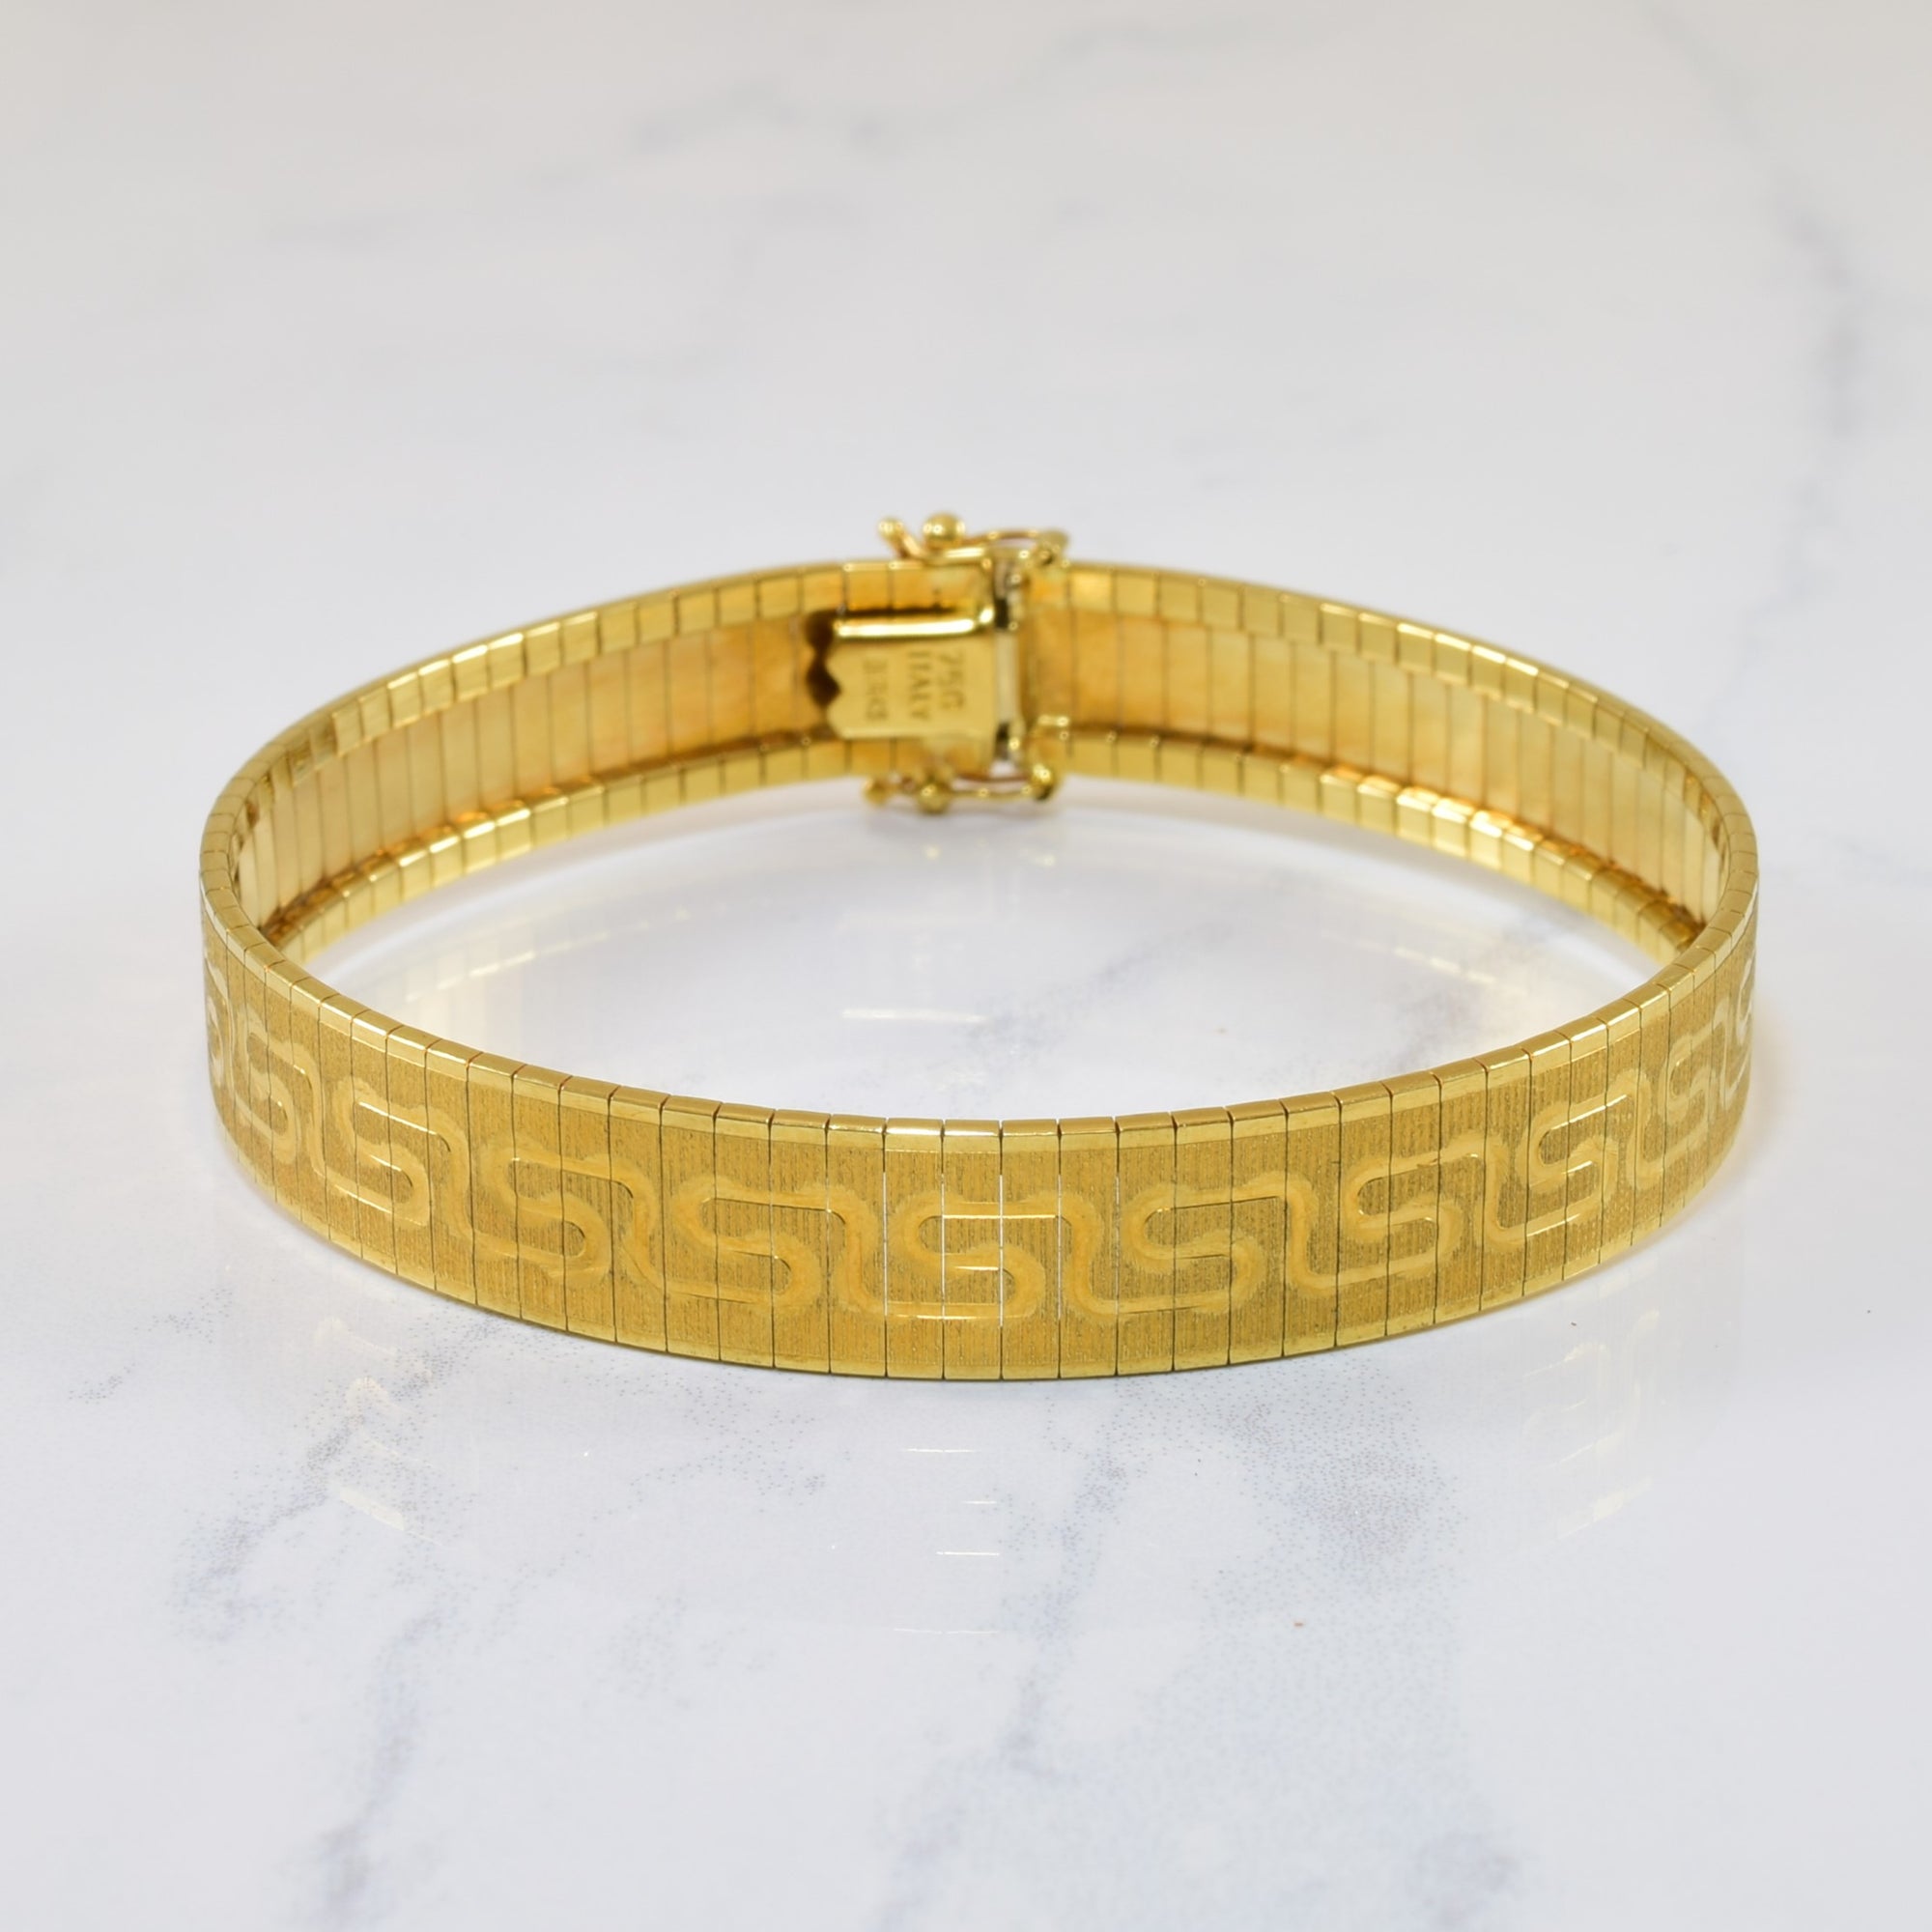 italian bangle bracelet in 18 kt yellow gold made in italy